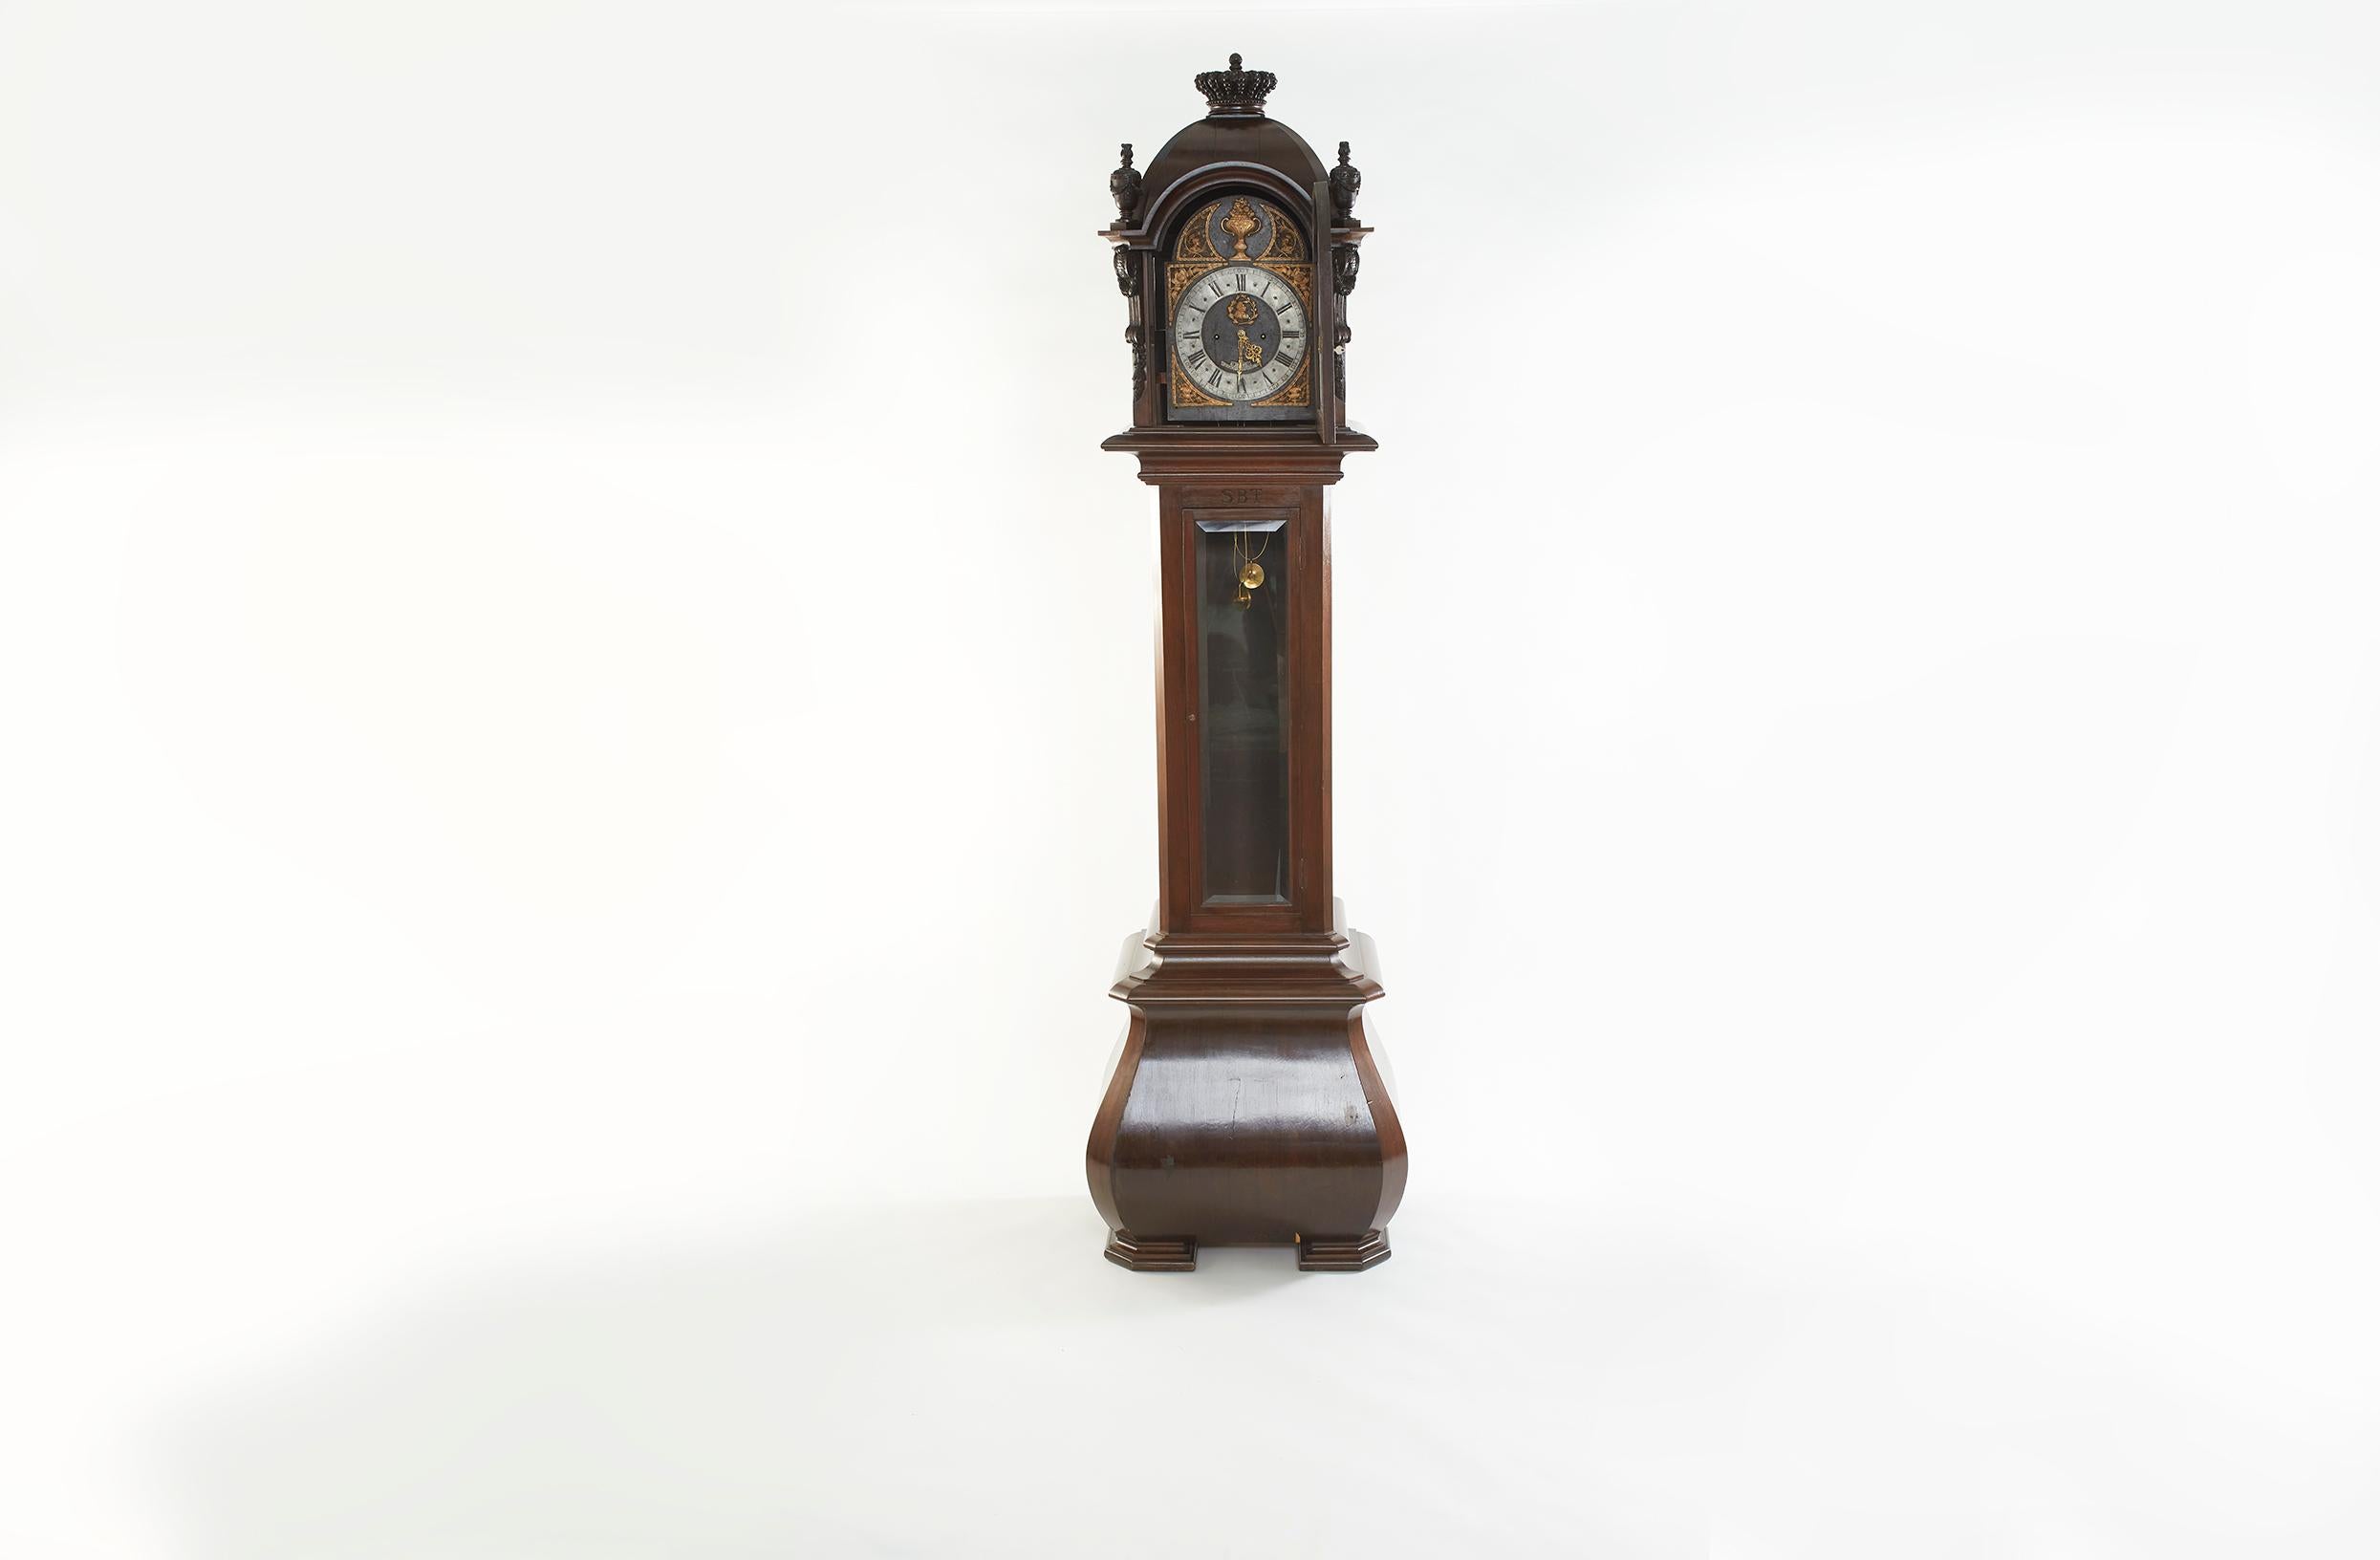 Mid 18th century walnut wood framed German 8-Day Grandfather clock. The tall case clock featured a dark walnut case with flared base, hood with half-columns and turned finials. Iron dial with silvered chapter ring and brass decorated spandrels. The